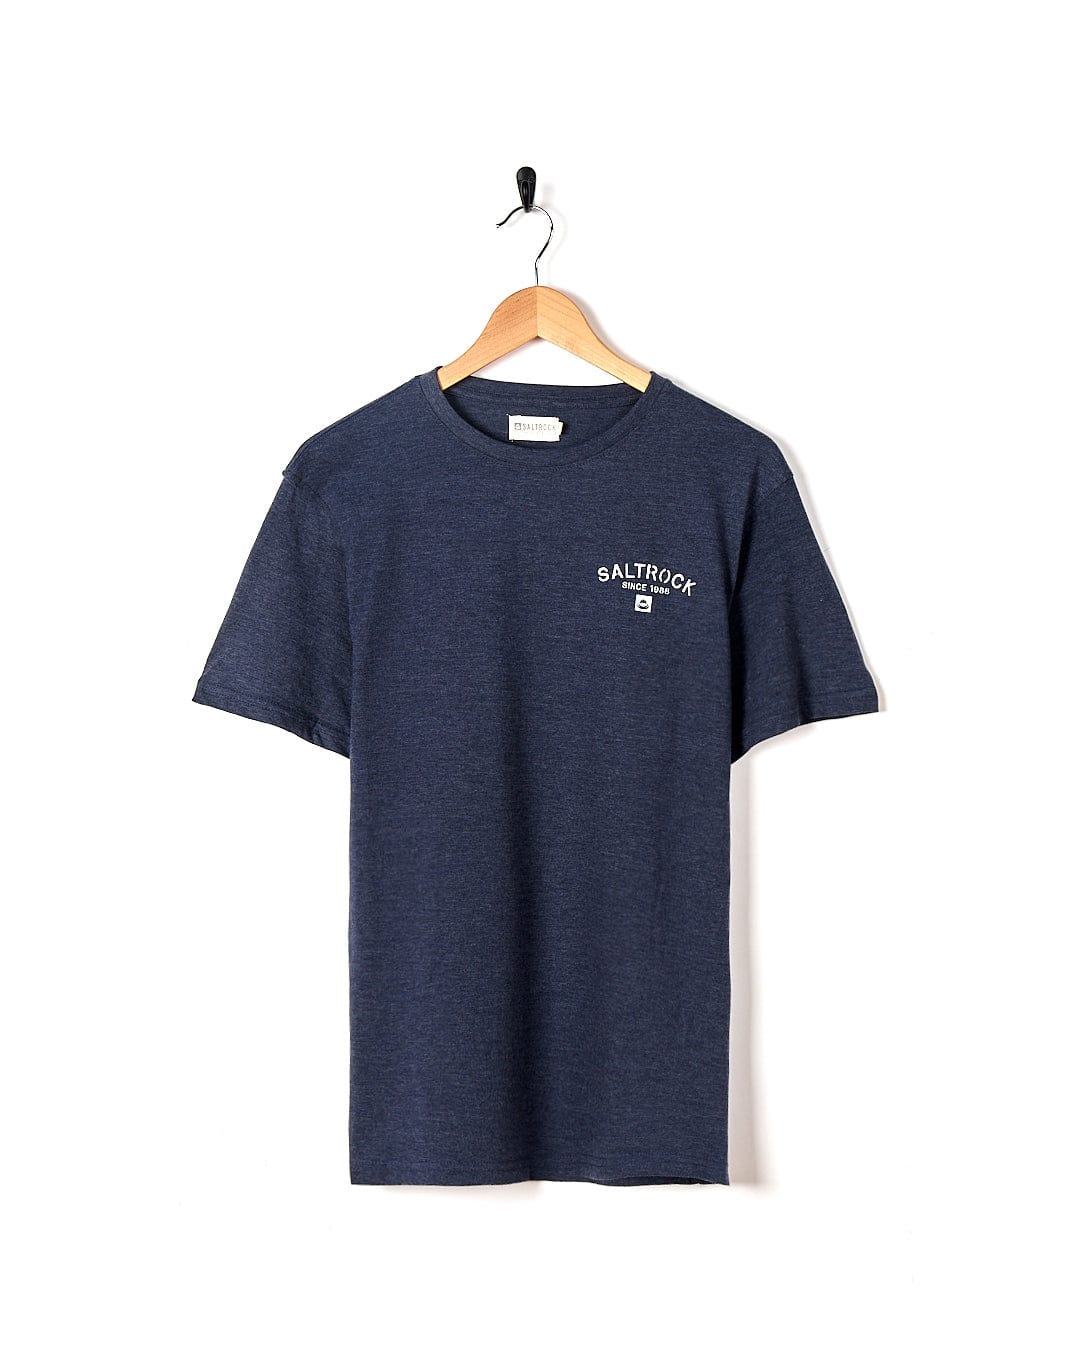 A Saltrock Stencil - Mens Location T-Shirt - Swanage - Dress Blue with a white logo on it.